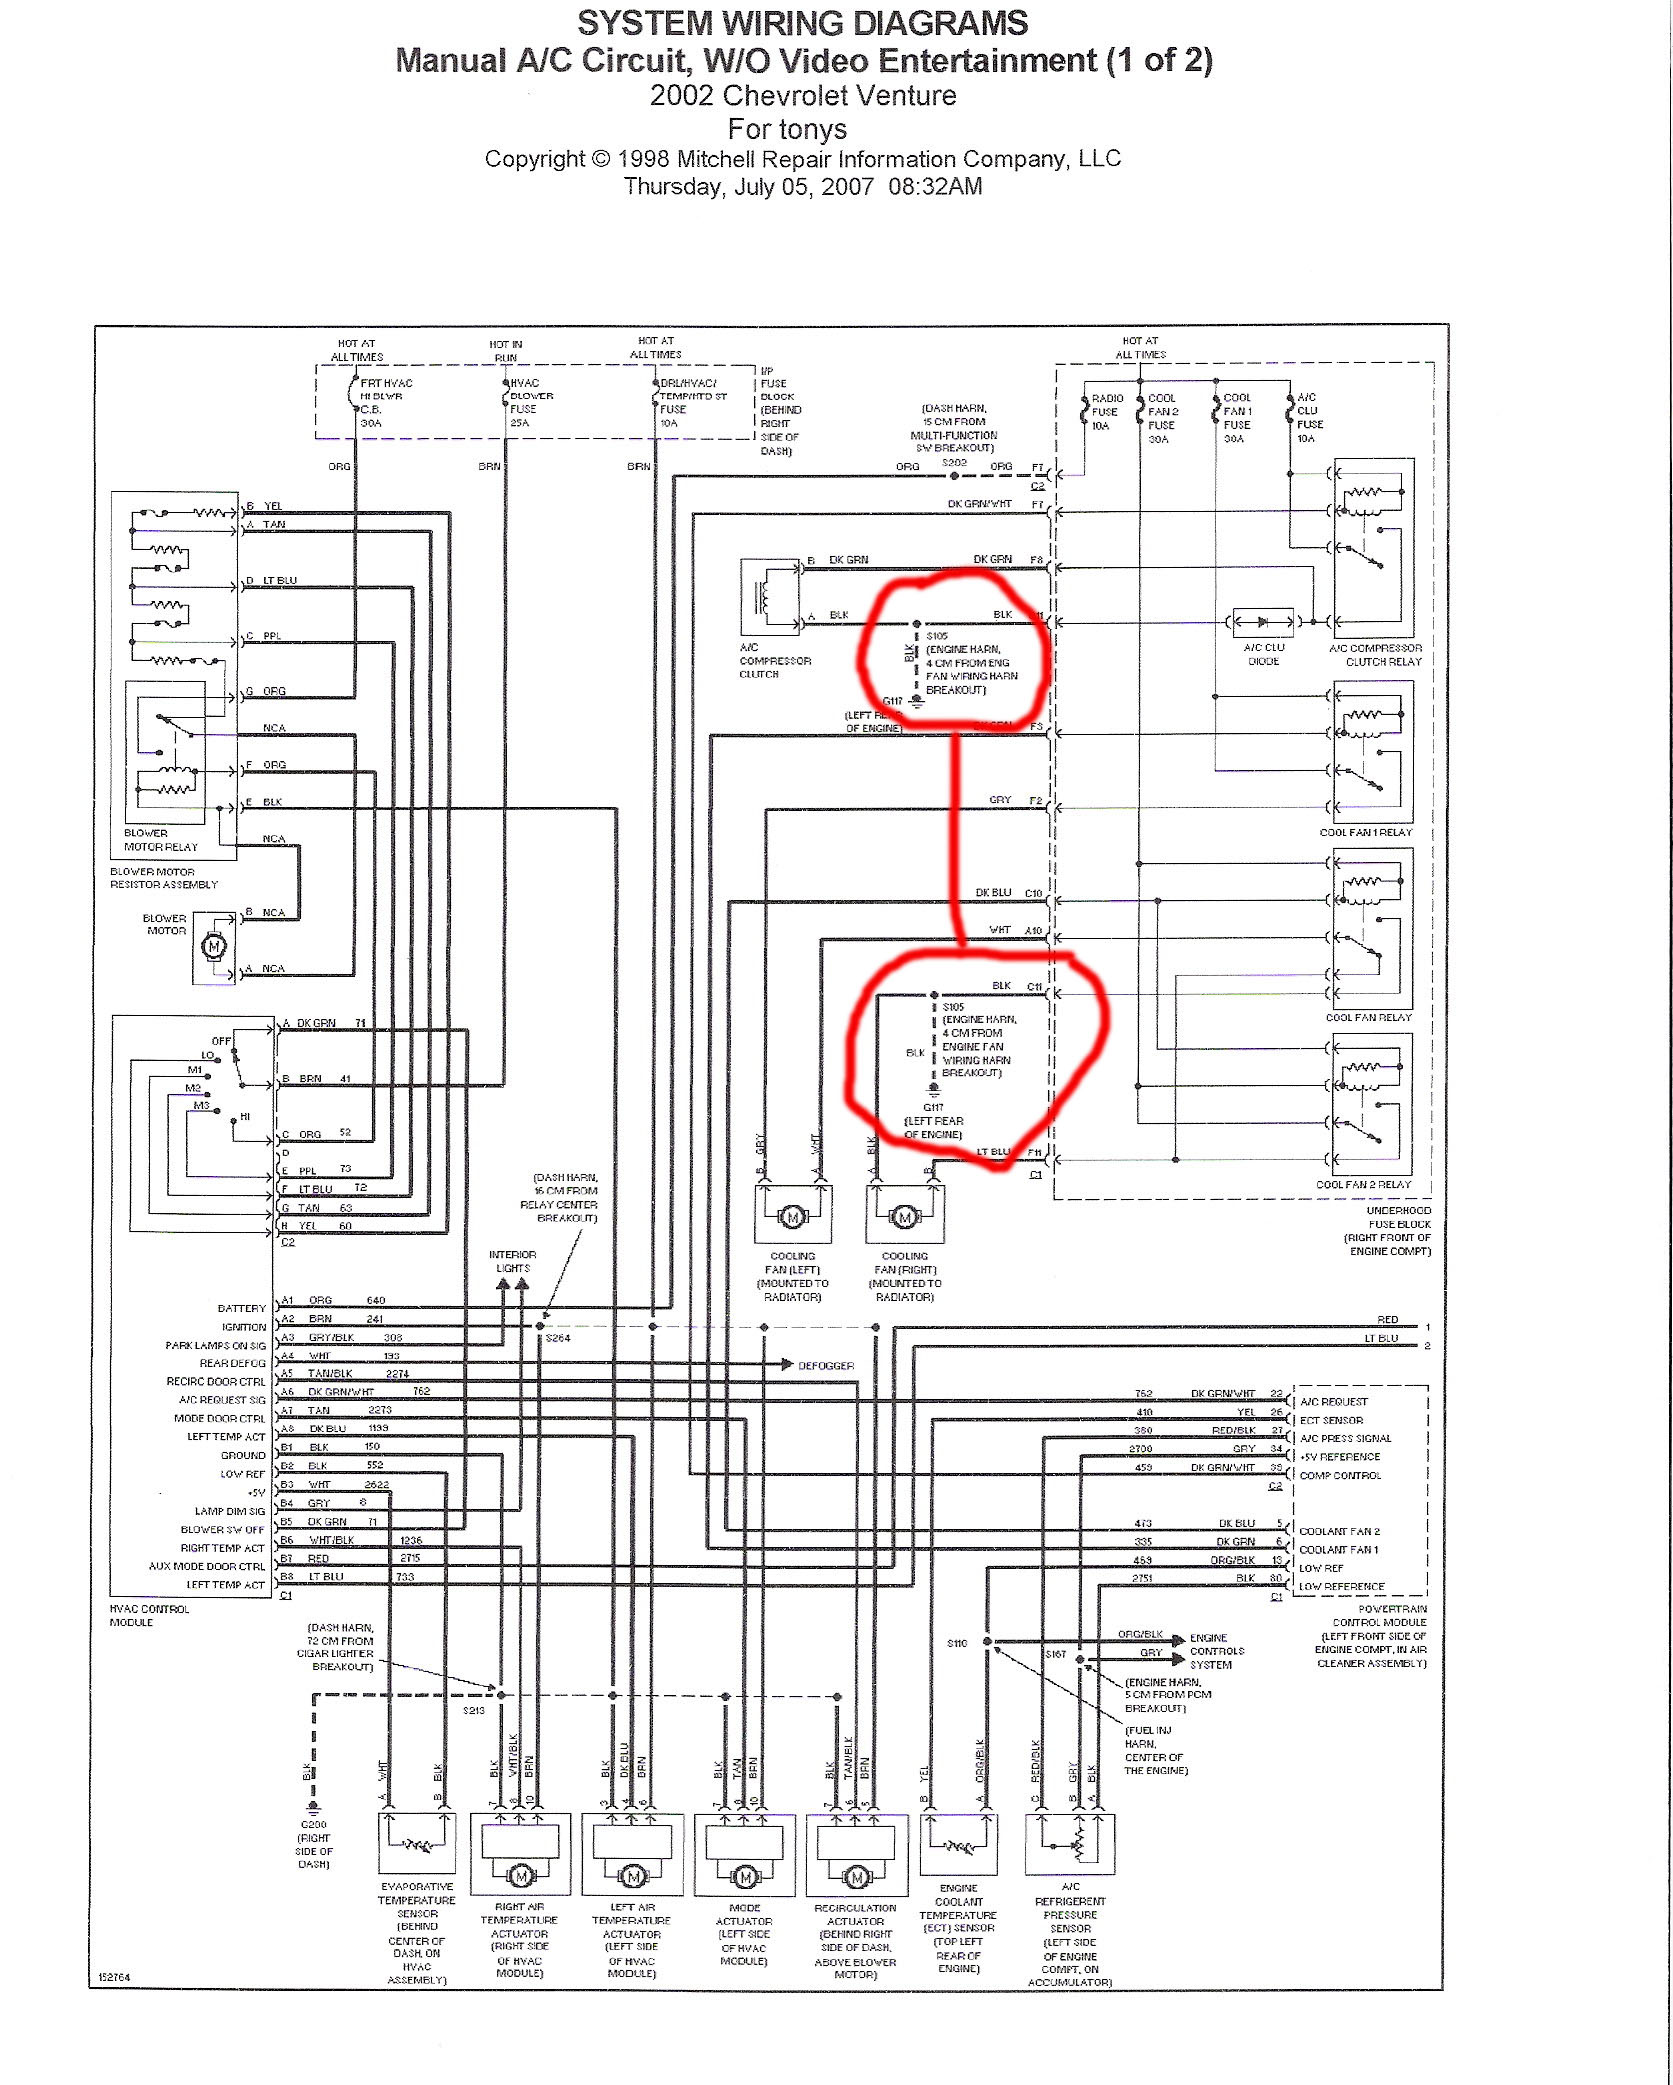 978 2011 Chevy Cruze Cooling Fan Wiring Diagram Wiring Resources